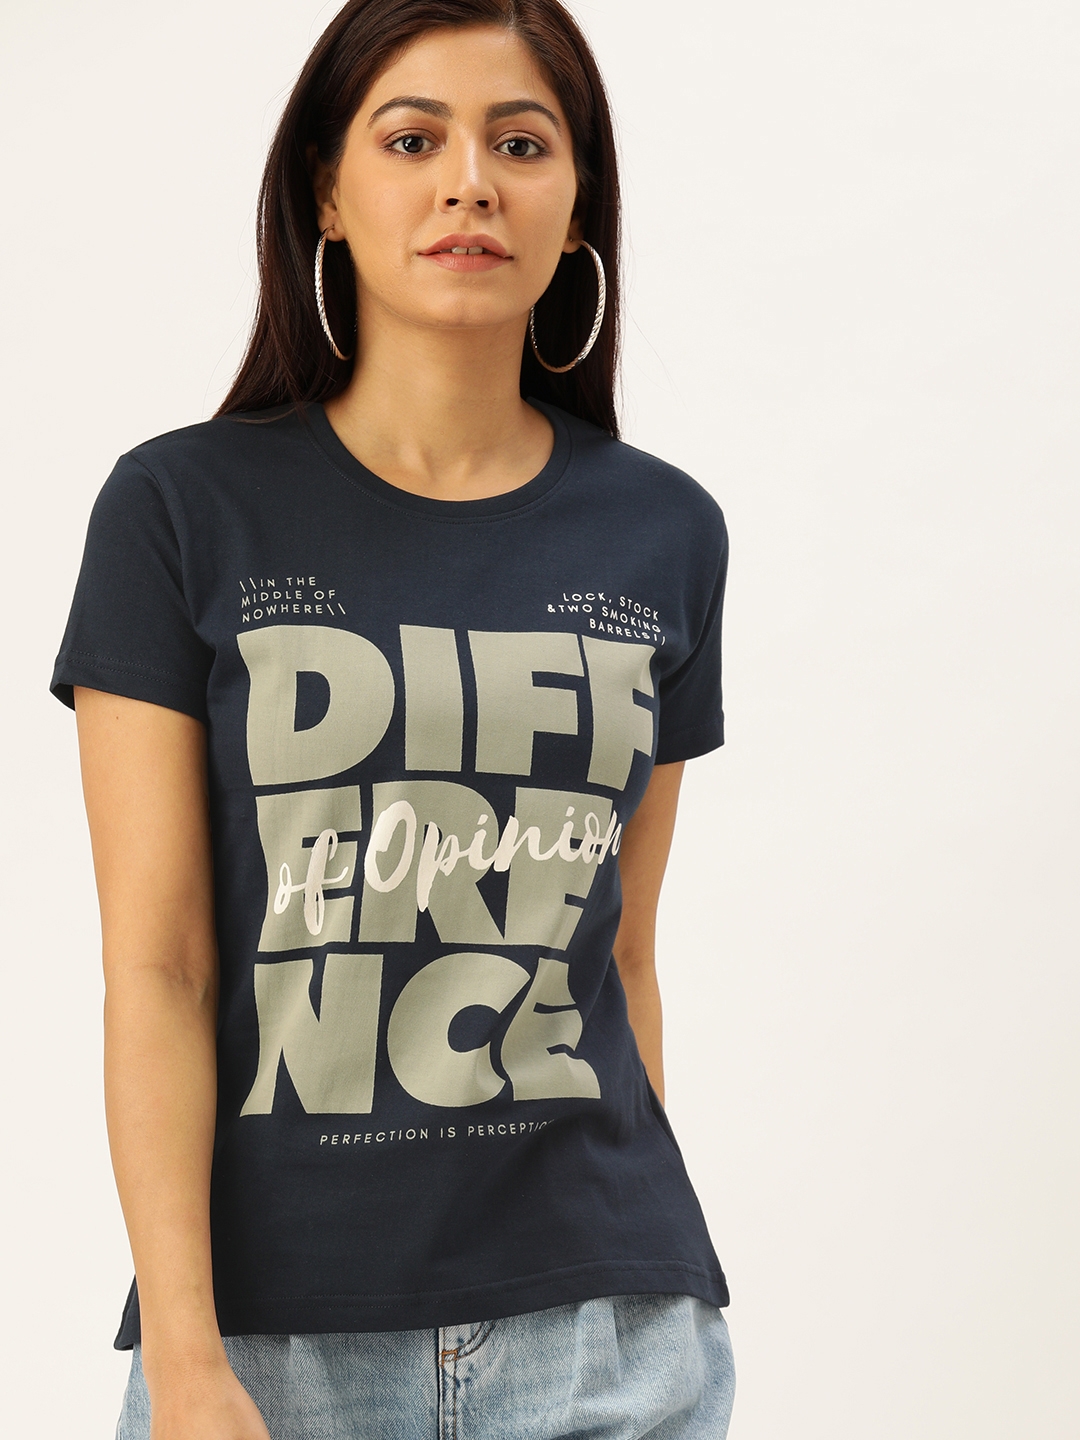 Difference of Opinion | Difference of Opinion Women Blue Typography Printed T-Shirt